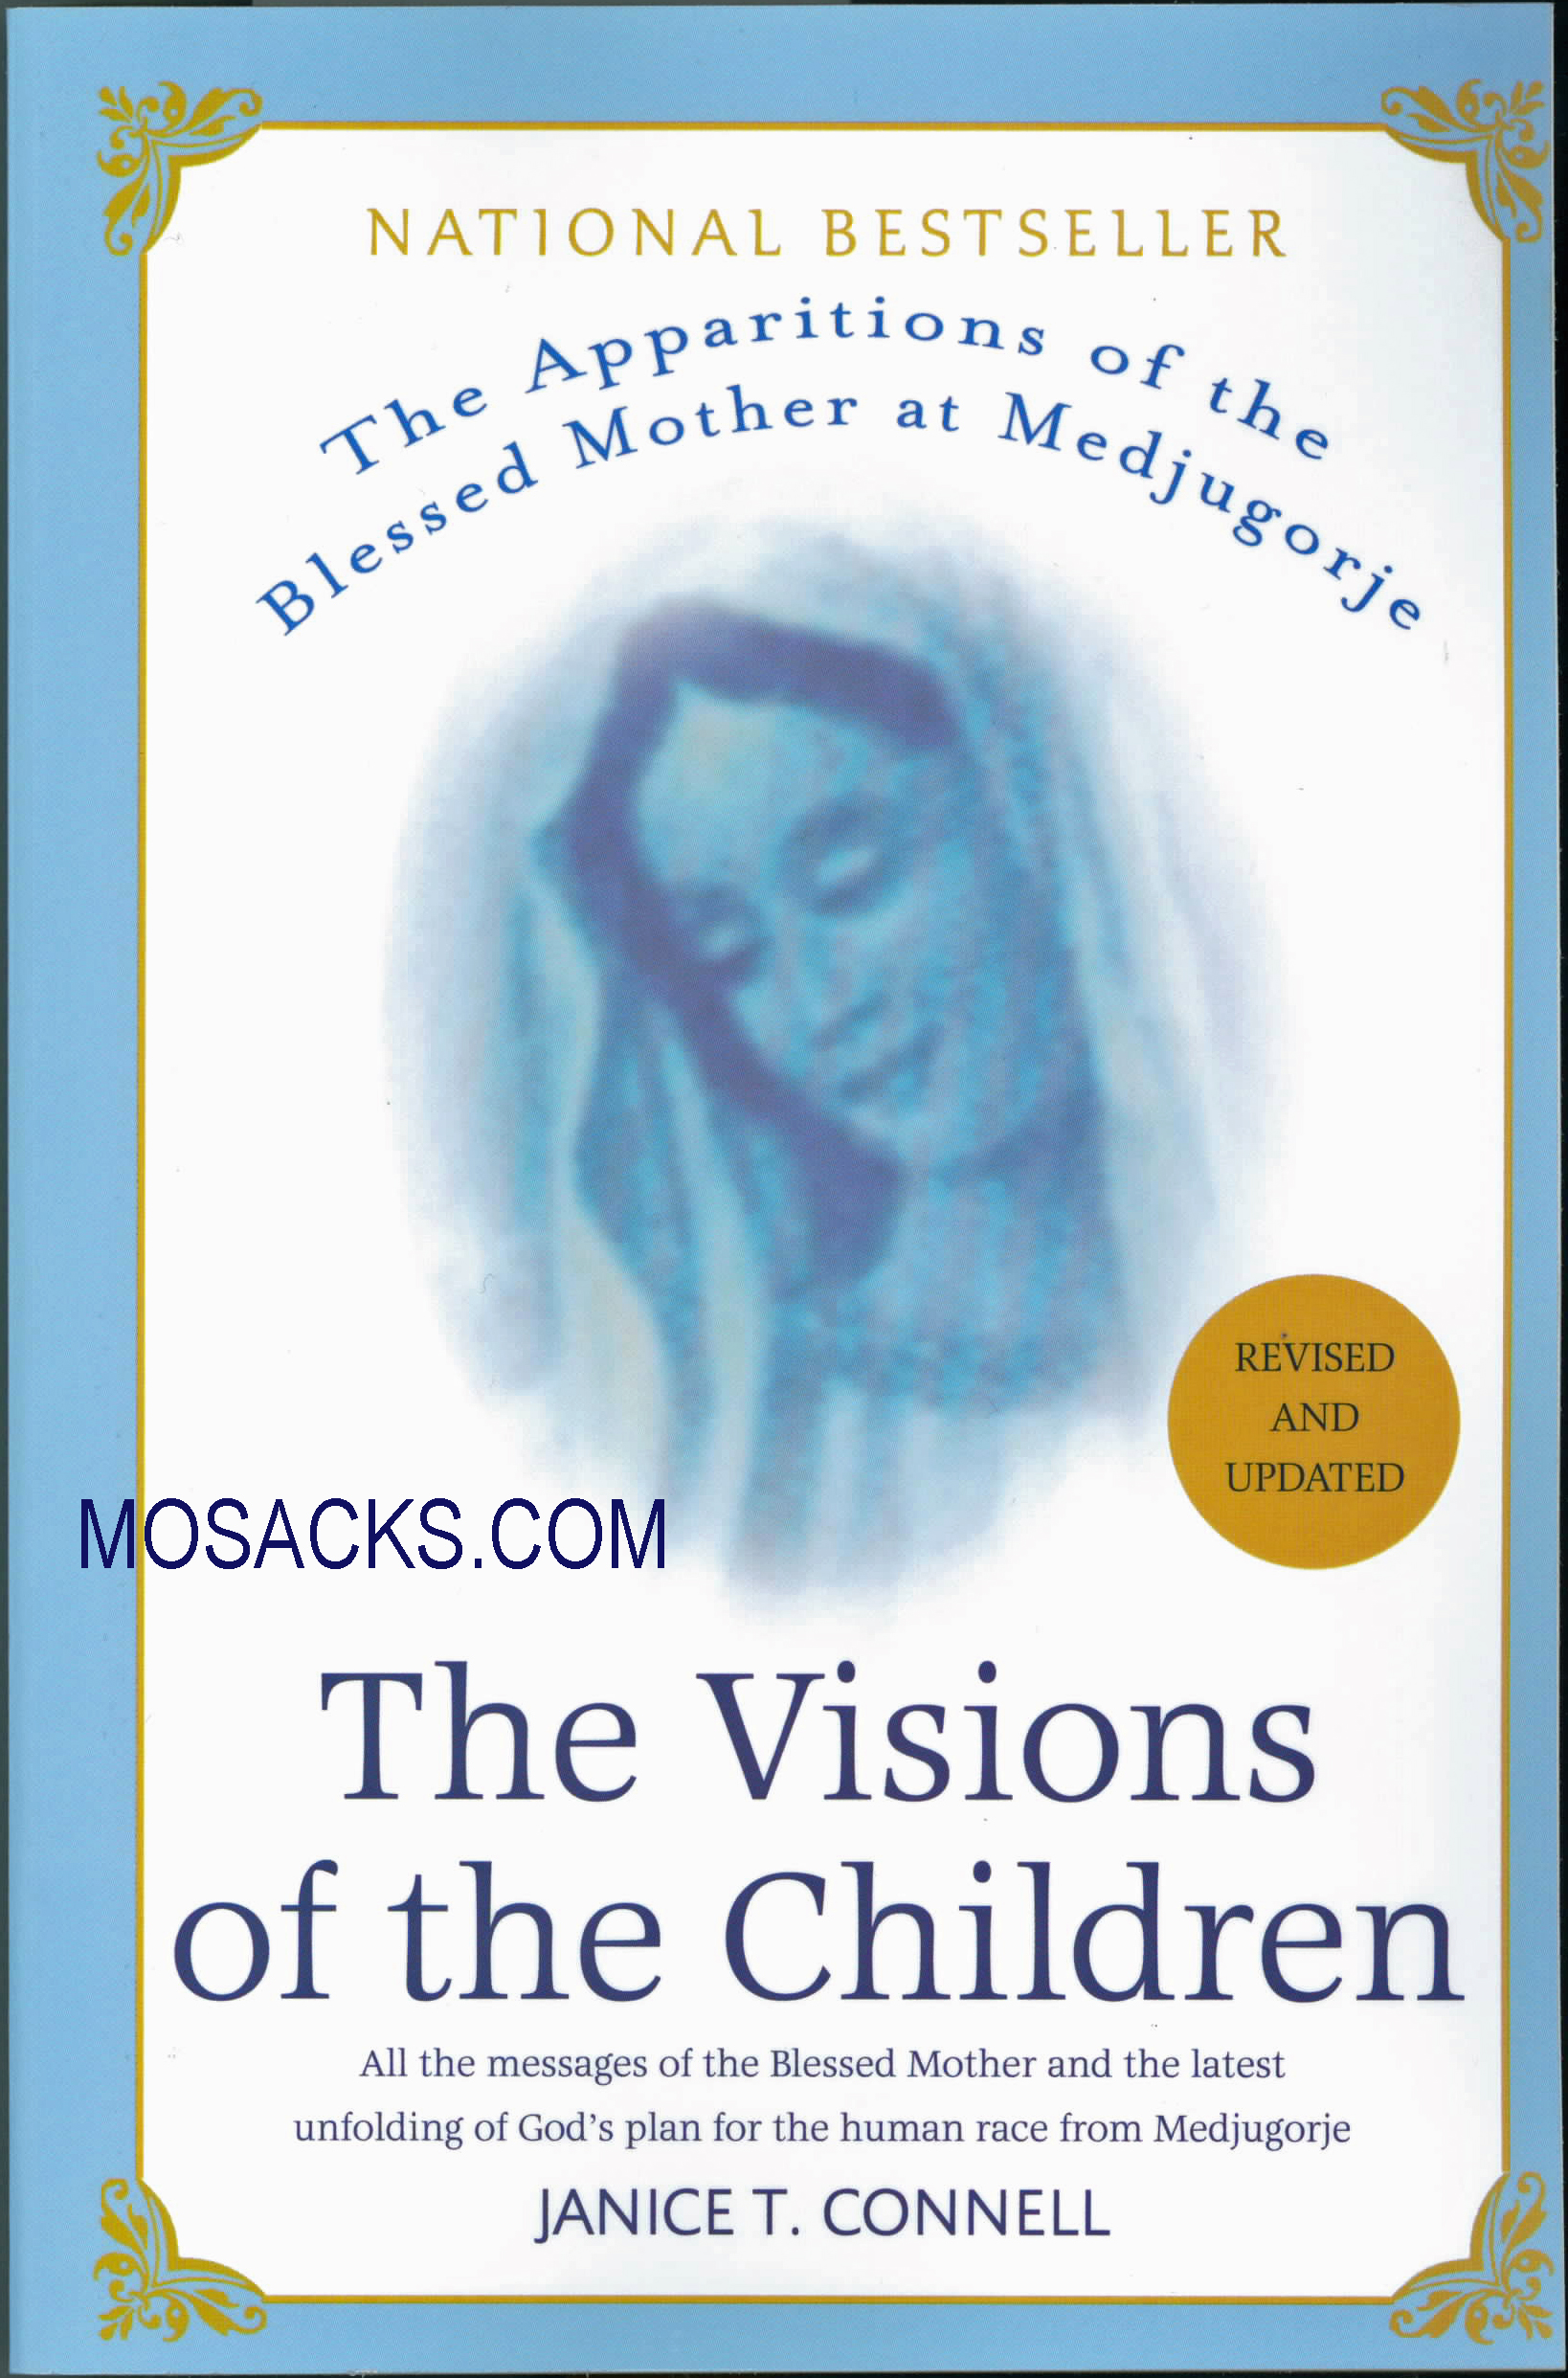 The Visions of the Children by Janice T. Connell 108-9780312361976 a Medjugorje book